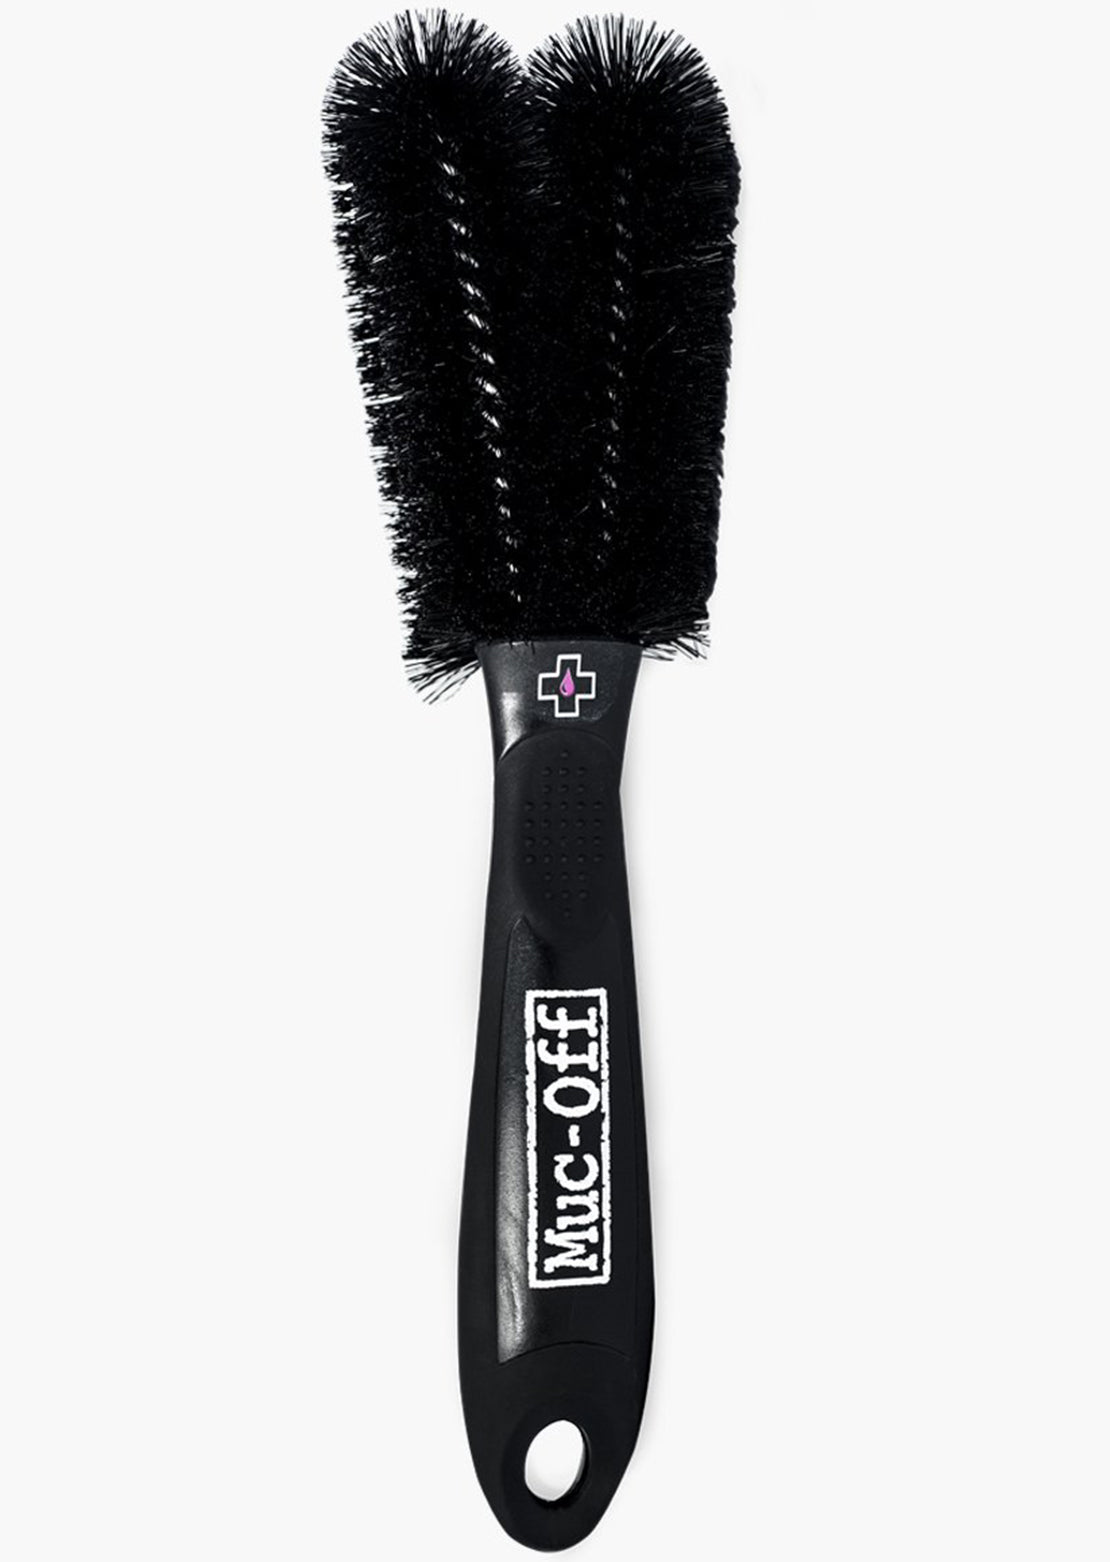 Muc-Off 8-in-1 Bike Cleaning Kit Pong Brush